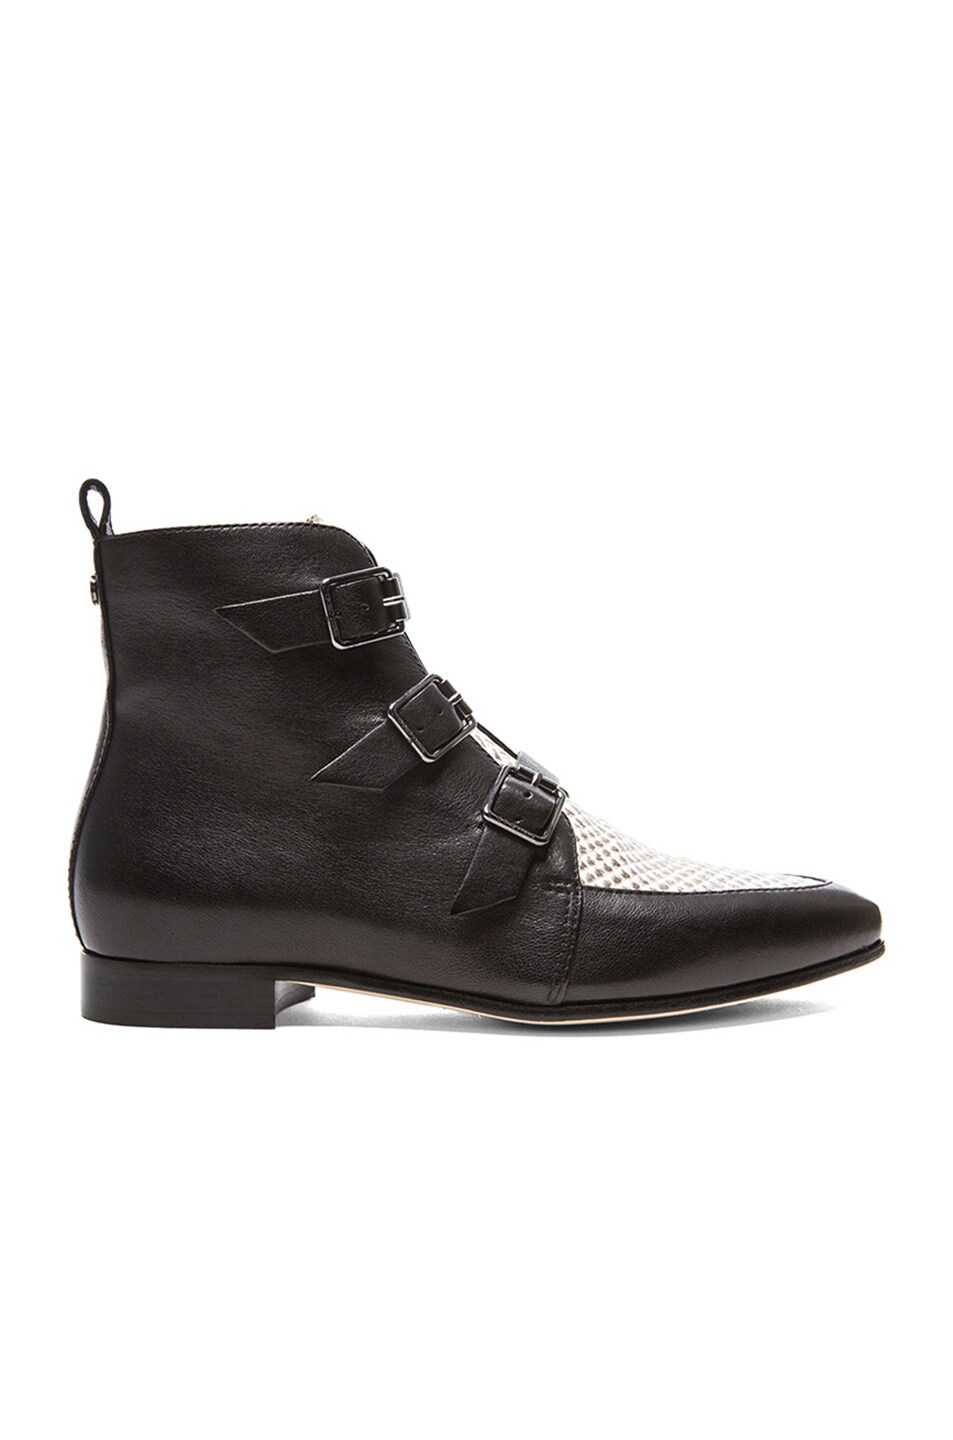 Image 1 of Jimmy Choo Marlin Leather Ankle Boots in Black & Natural